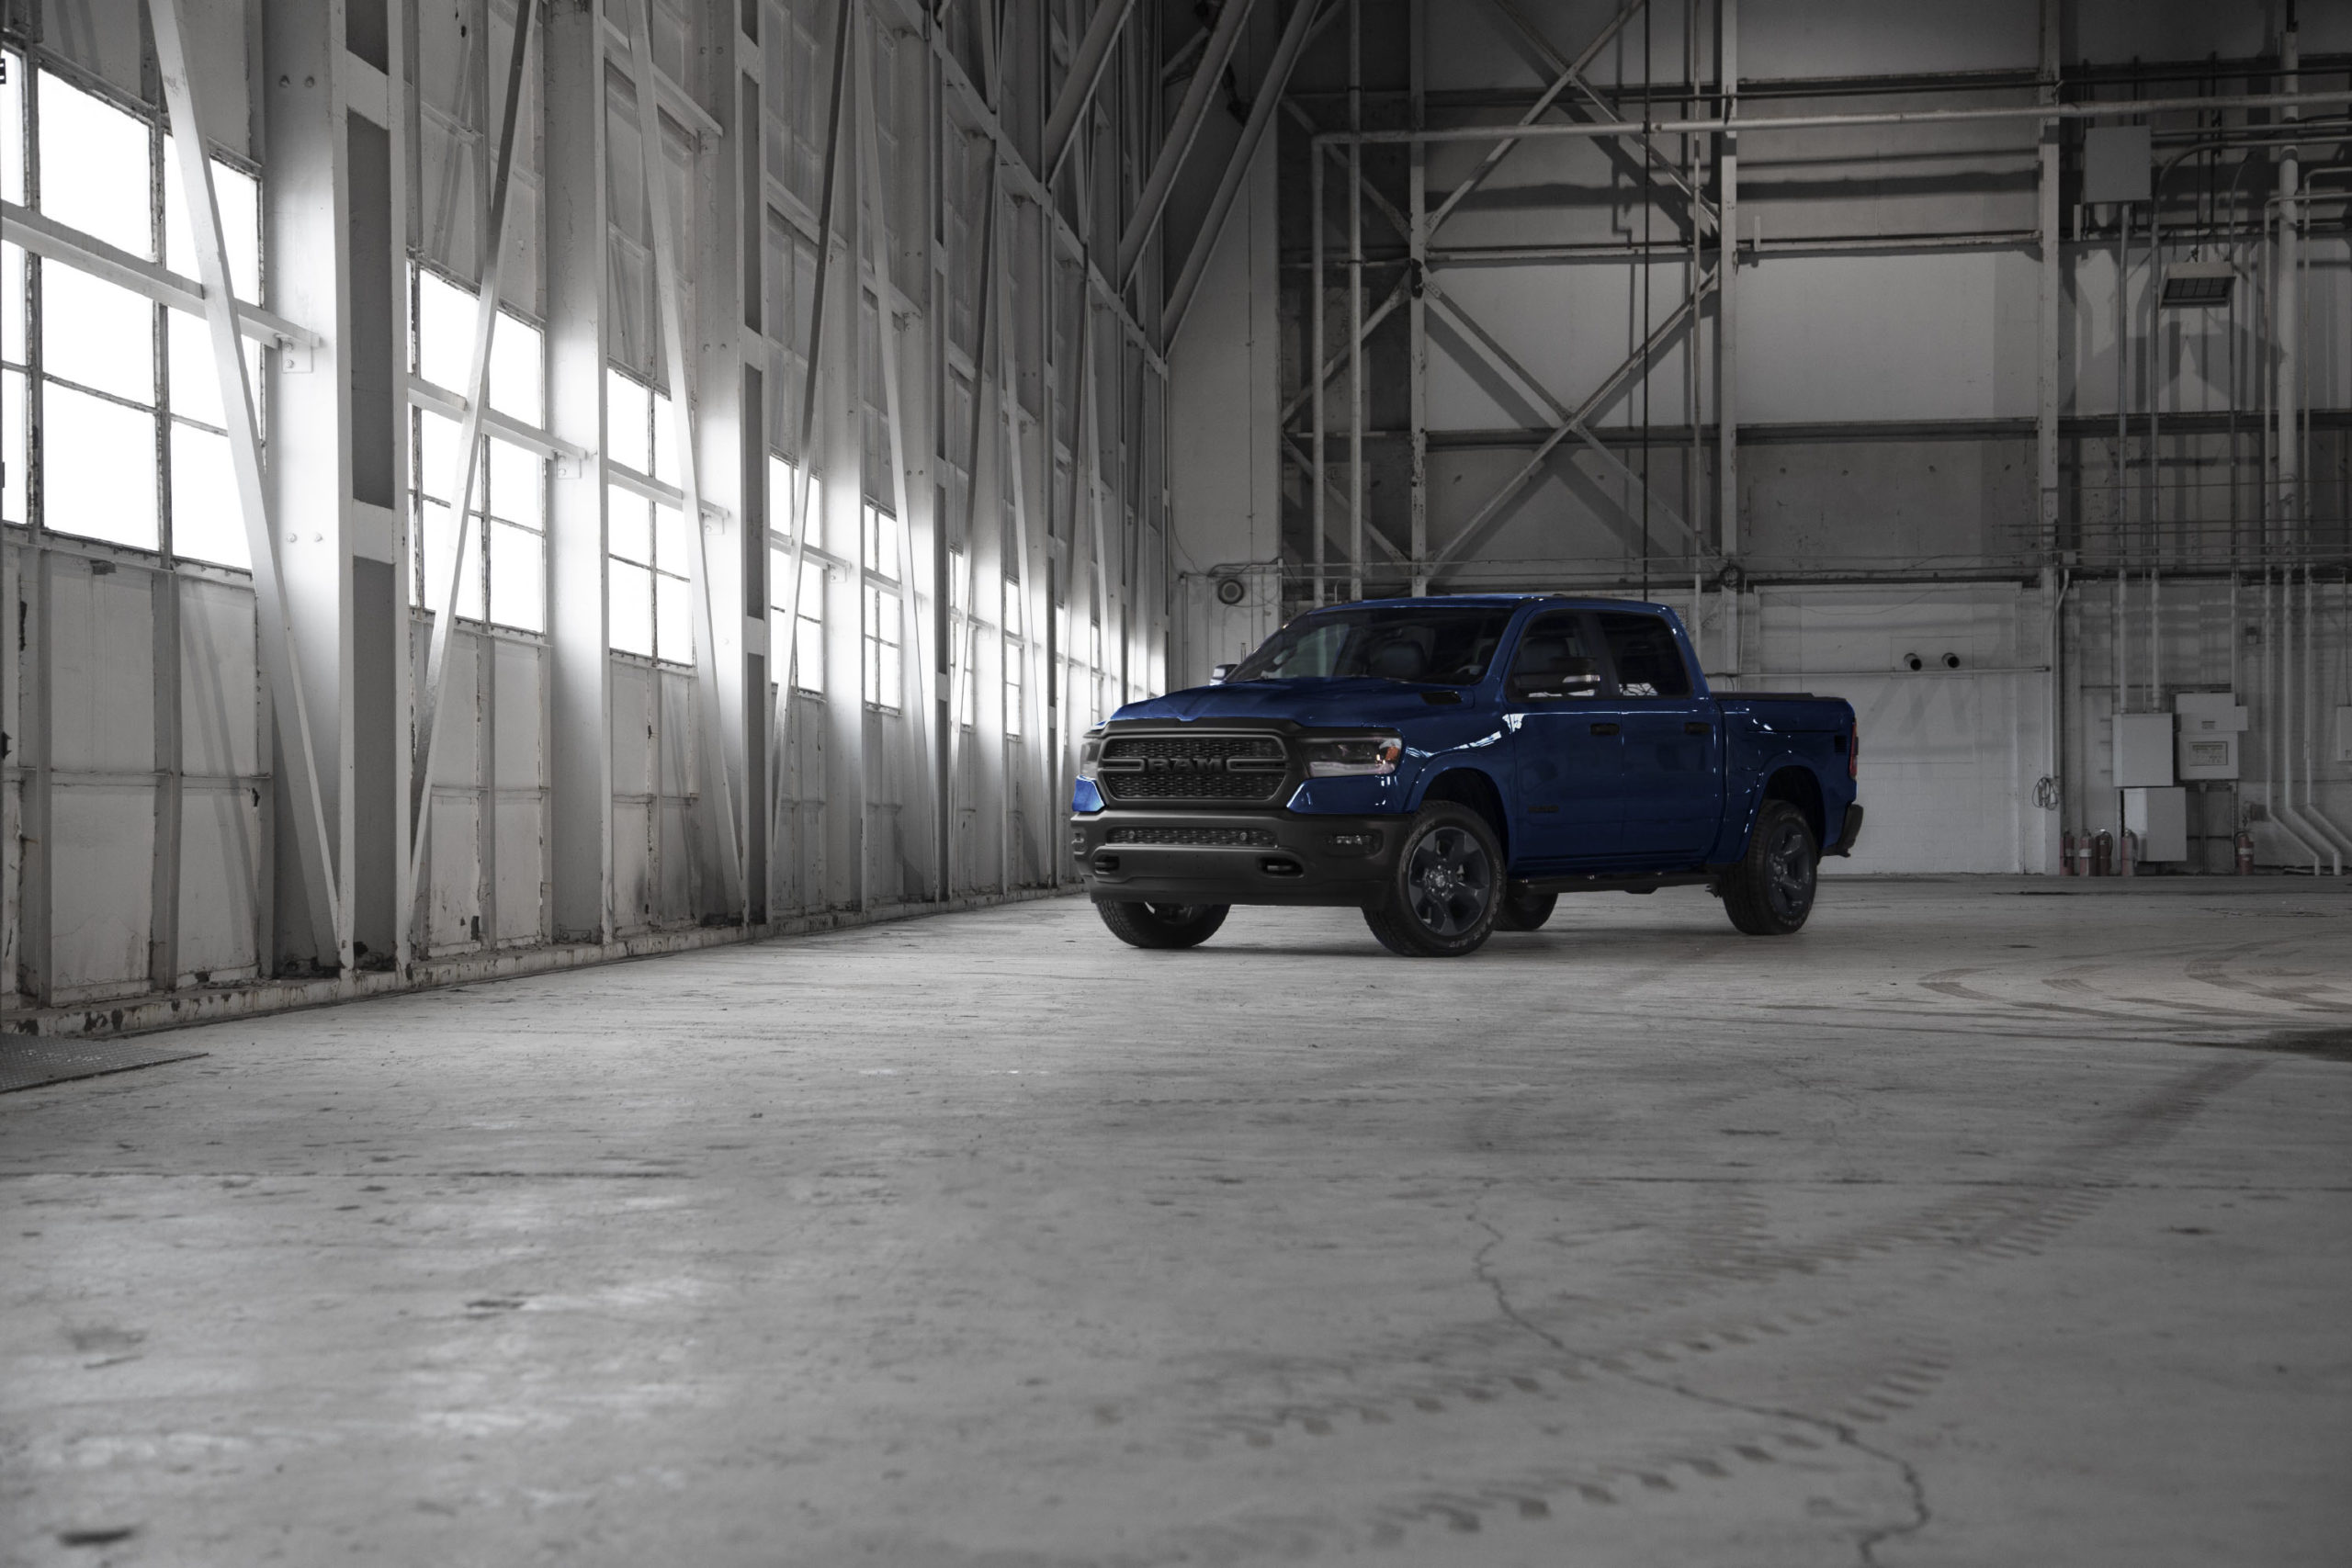 Ram Launches Second Phase of U.S. Armed Forces-Inspired 'Built to Serve' Trucks | THE SHOP